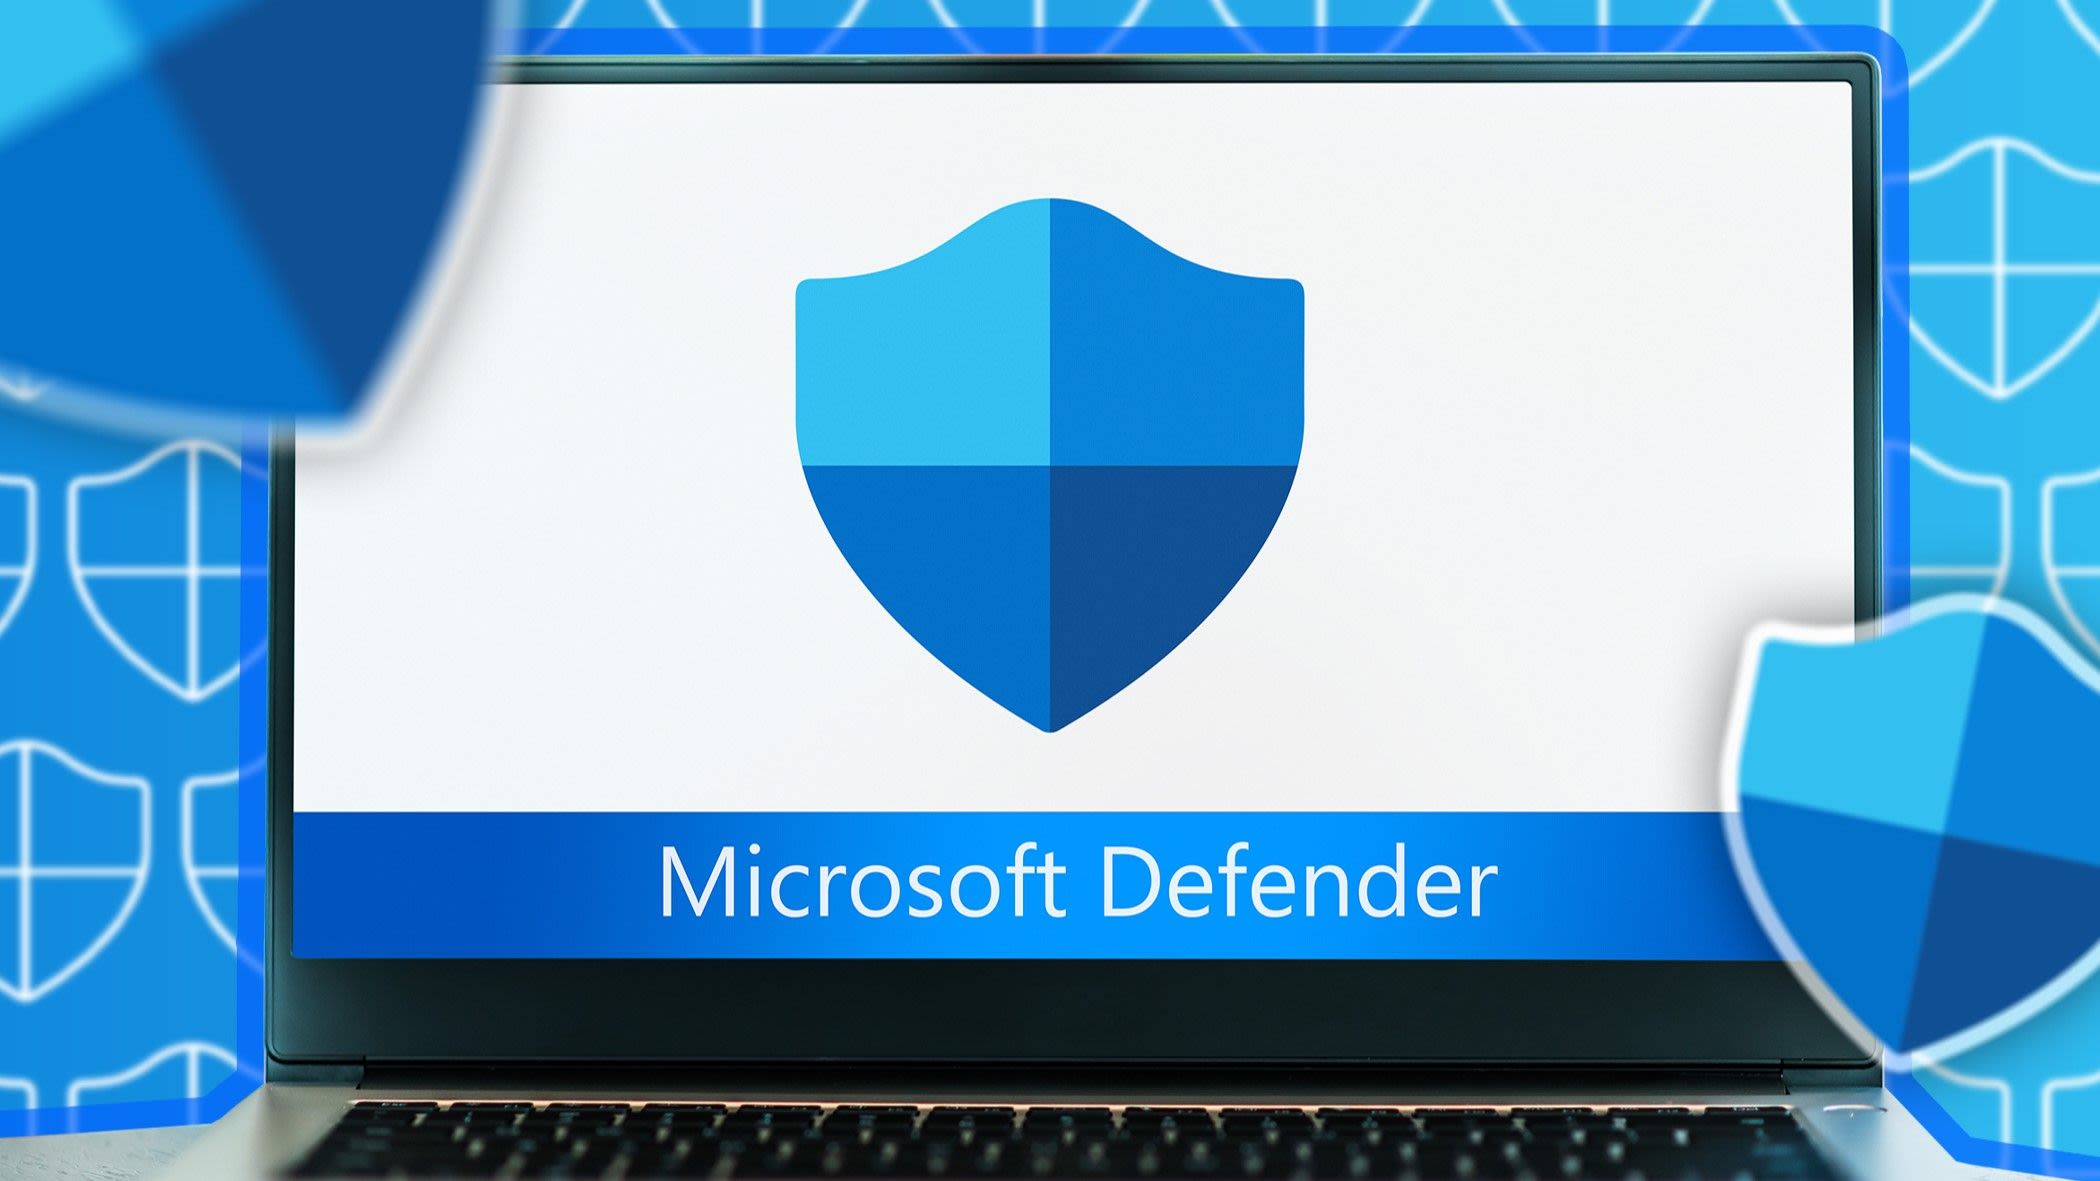 Did You Know There Are Two Different Microsoft Defender Apps?